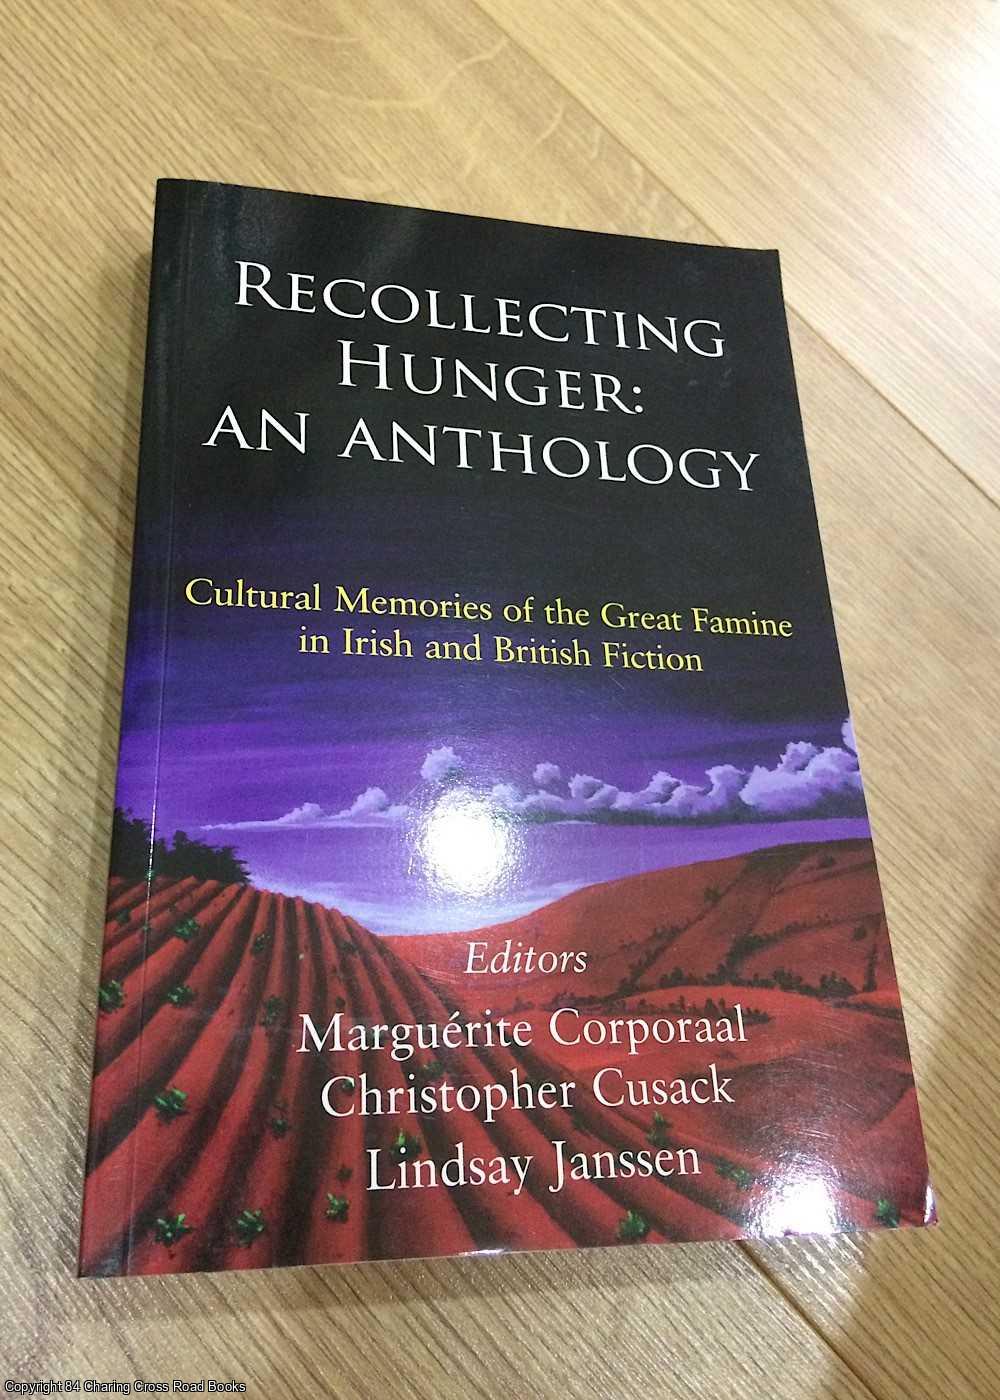 Marguerite Corporaal, Christopher Cusack, Lindsay Janssen - Recollecting Hunger: Cultural Memories of the Great Famine in Irish and British Fiction